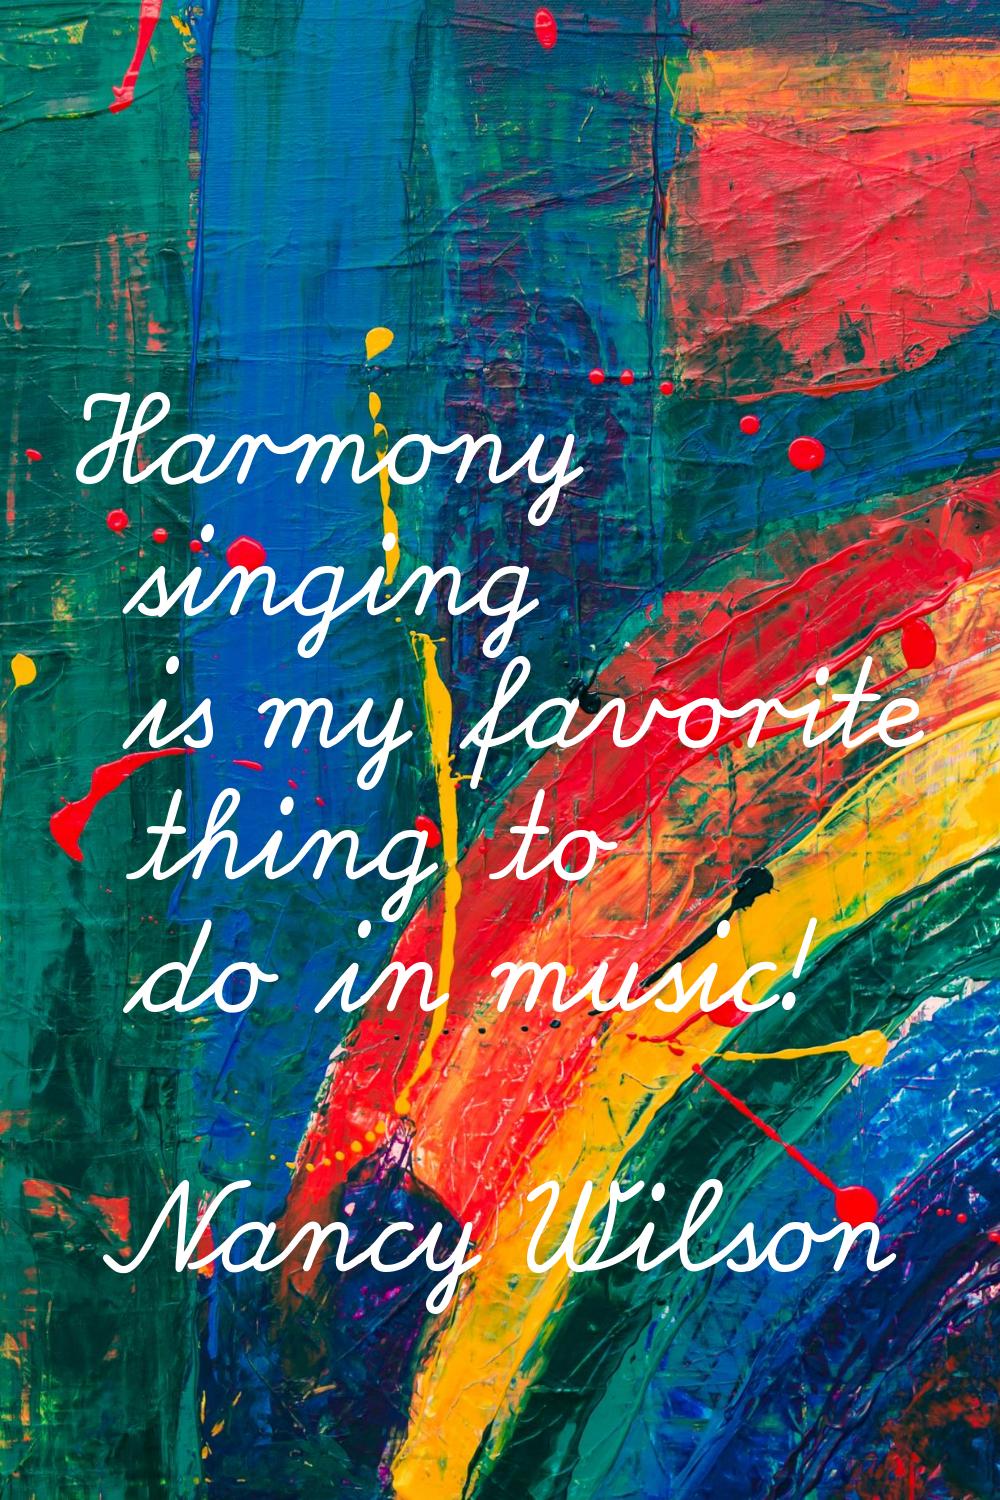 Harmony singing is my favorite thing to do in music!